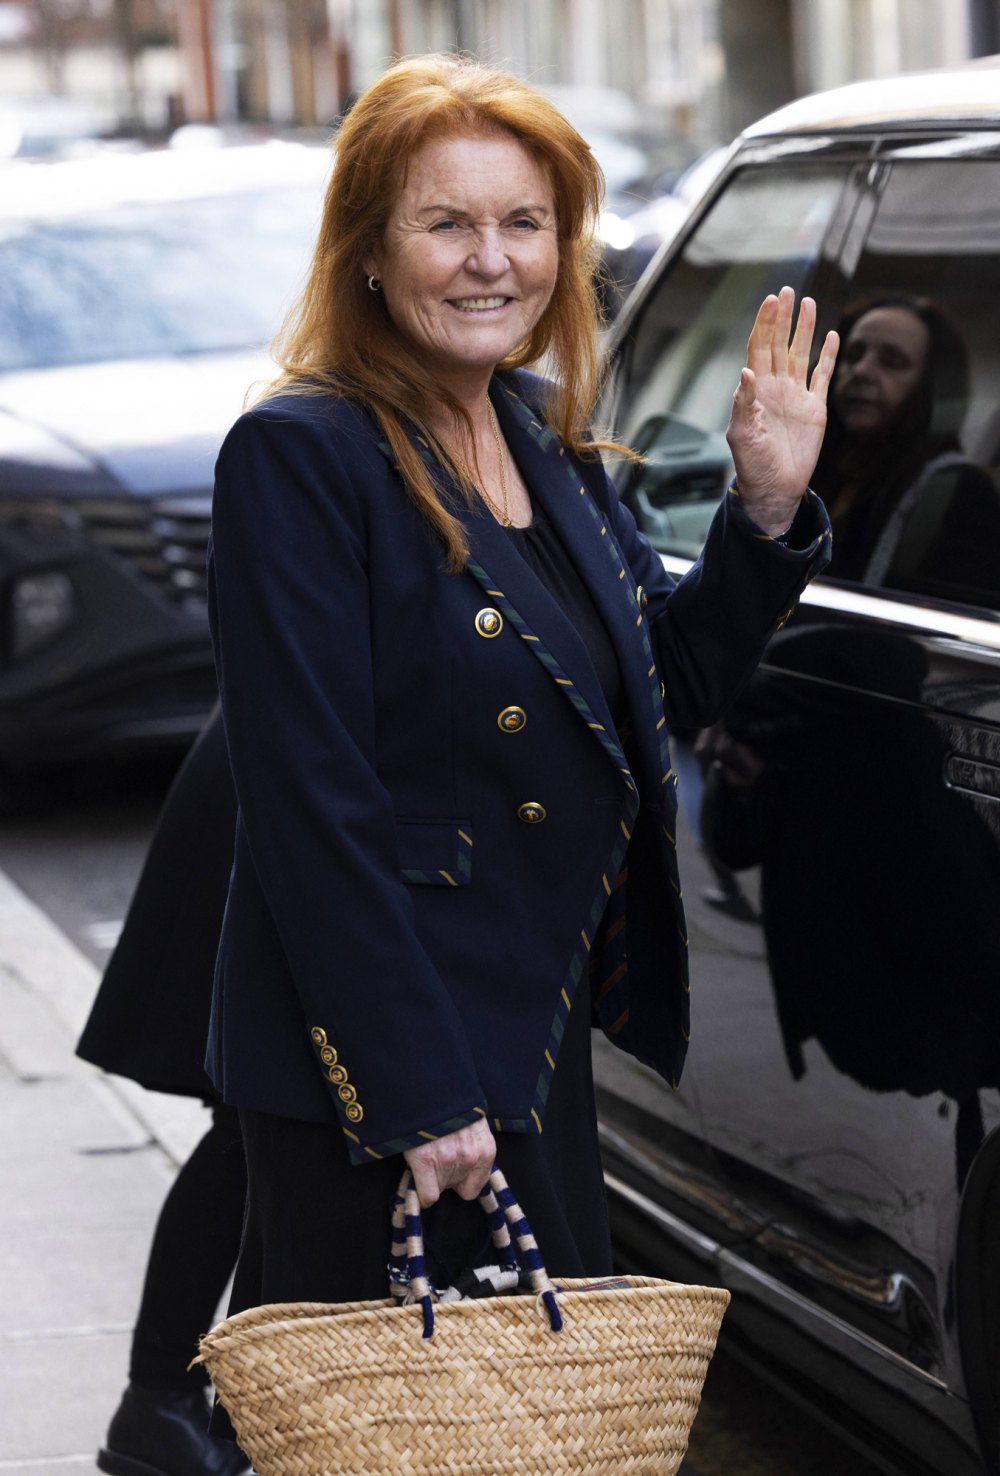 Sarah Ferguson Appears to Be in High Spirits After 2nd Cancer Diagnosis